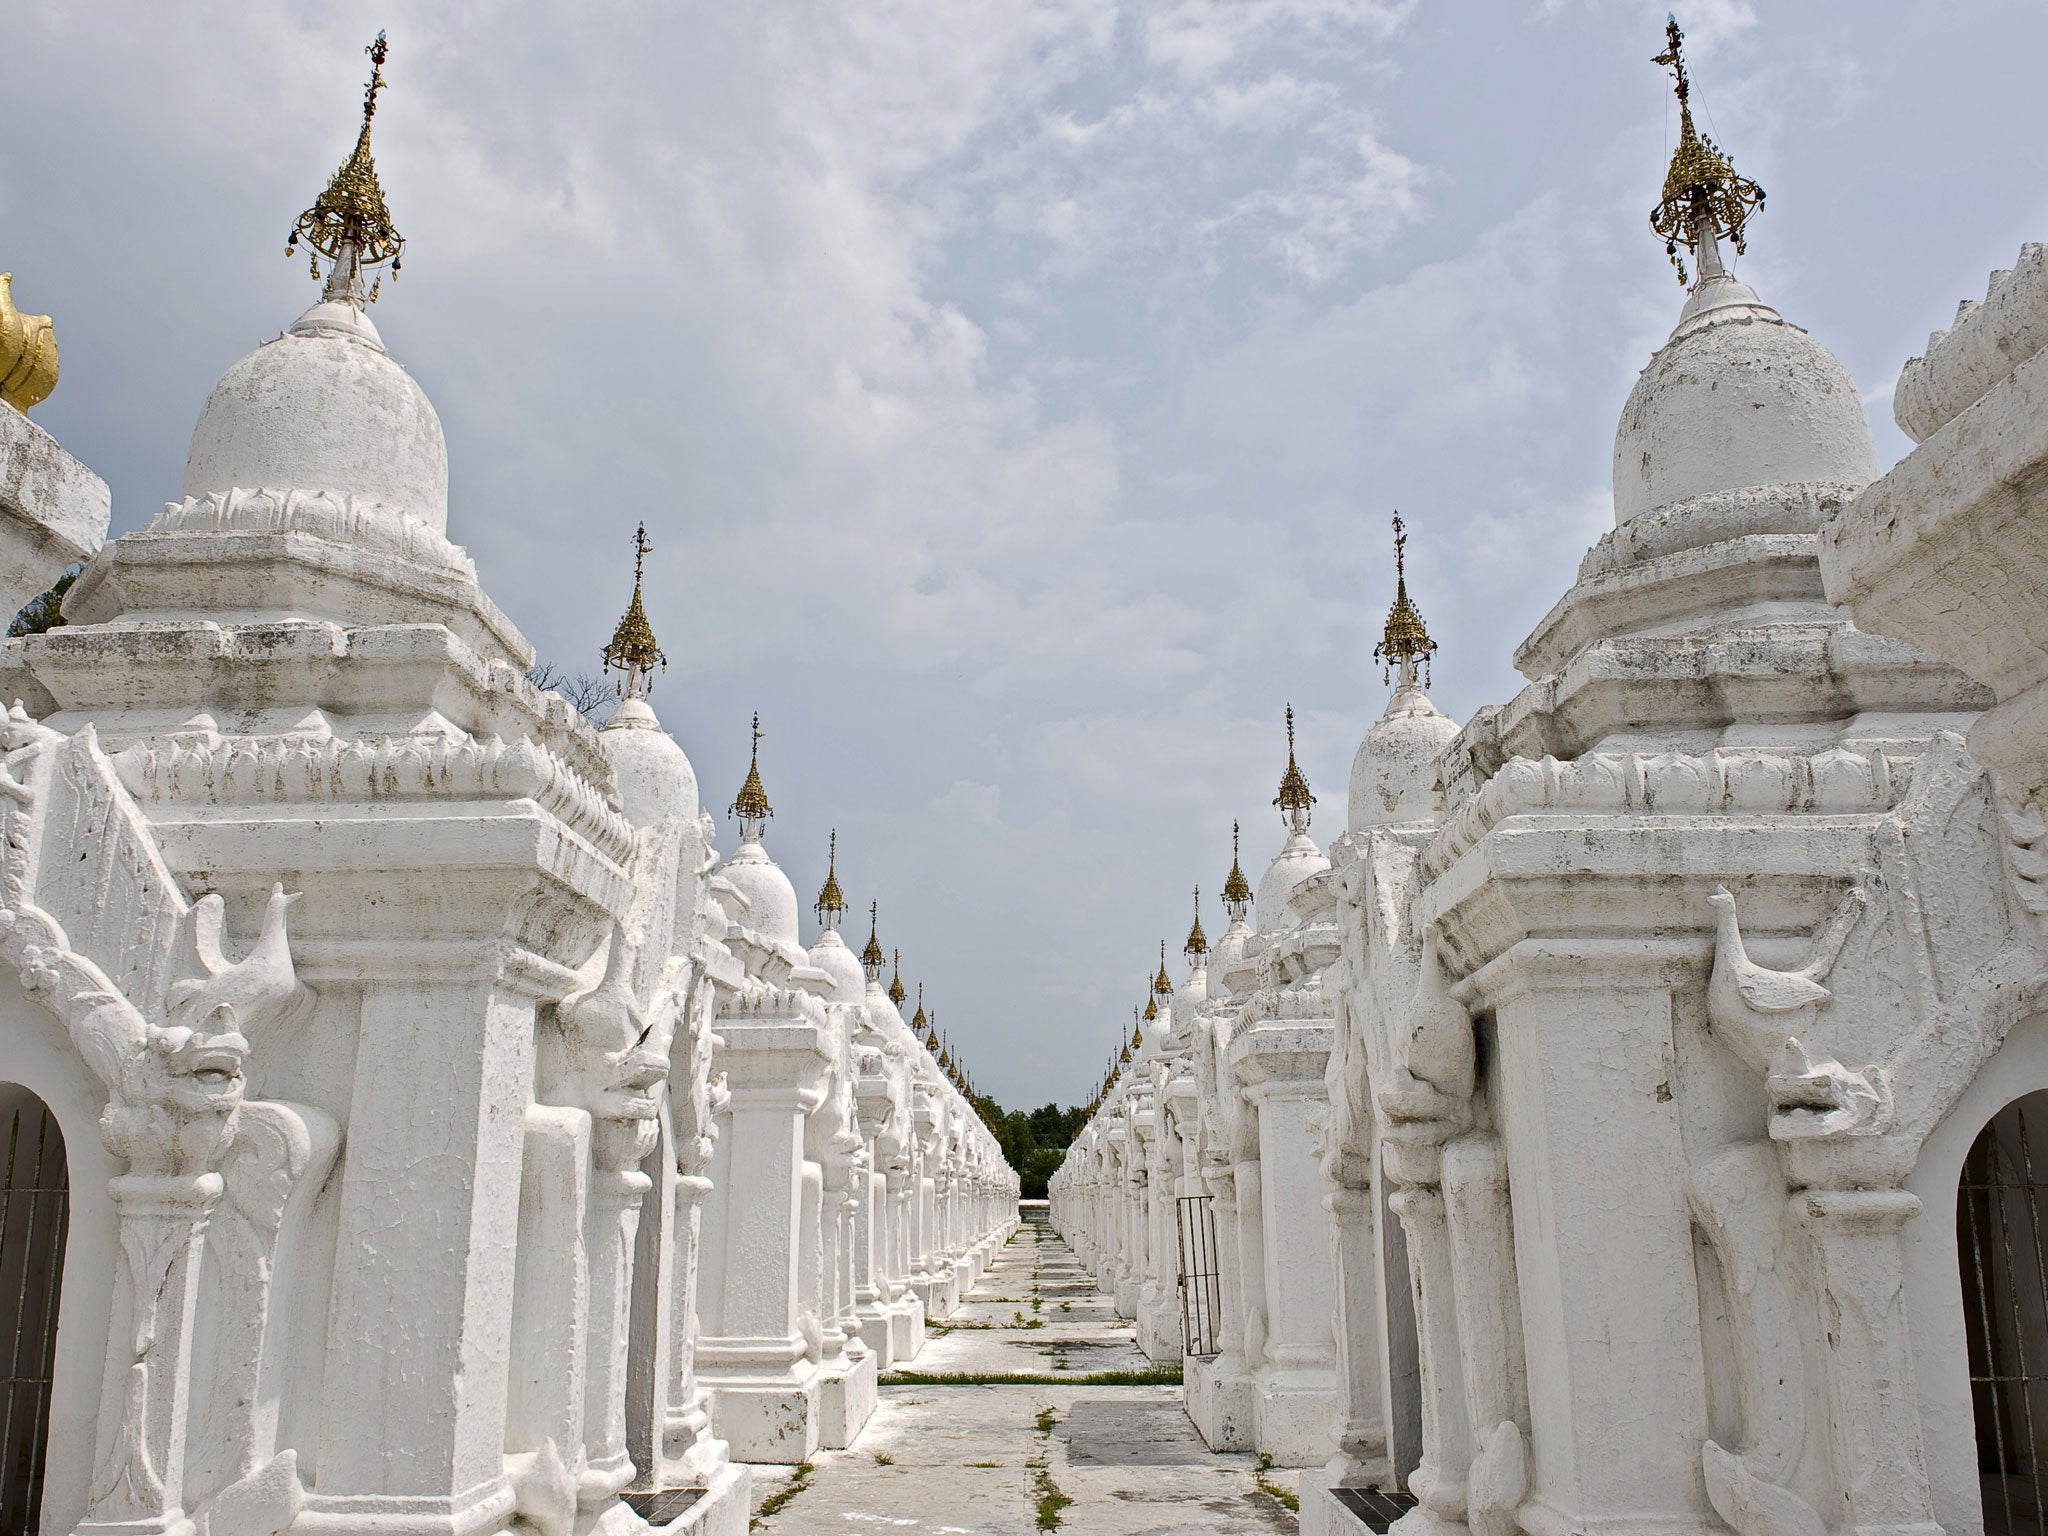 Some of the 729 stupas of the Kuthodaw pagoda in Mandalay. The pagoda contains the world's largest book, and lies at the foot of Mandalay Hill